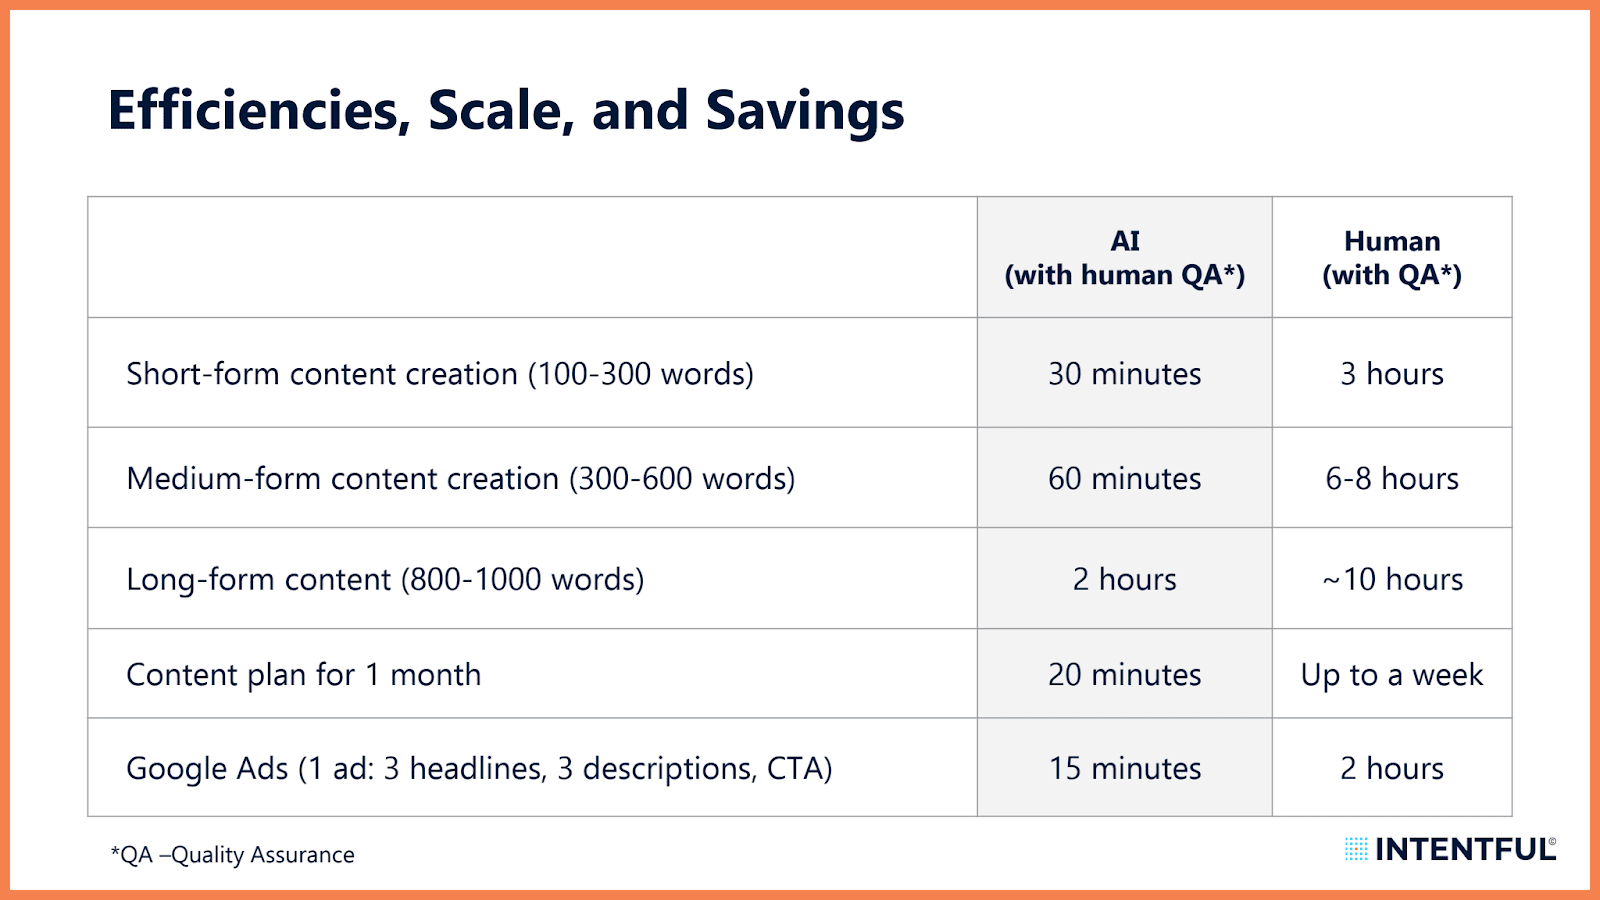 Efficiencies, Scale, and Savings of AI